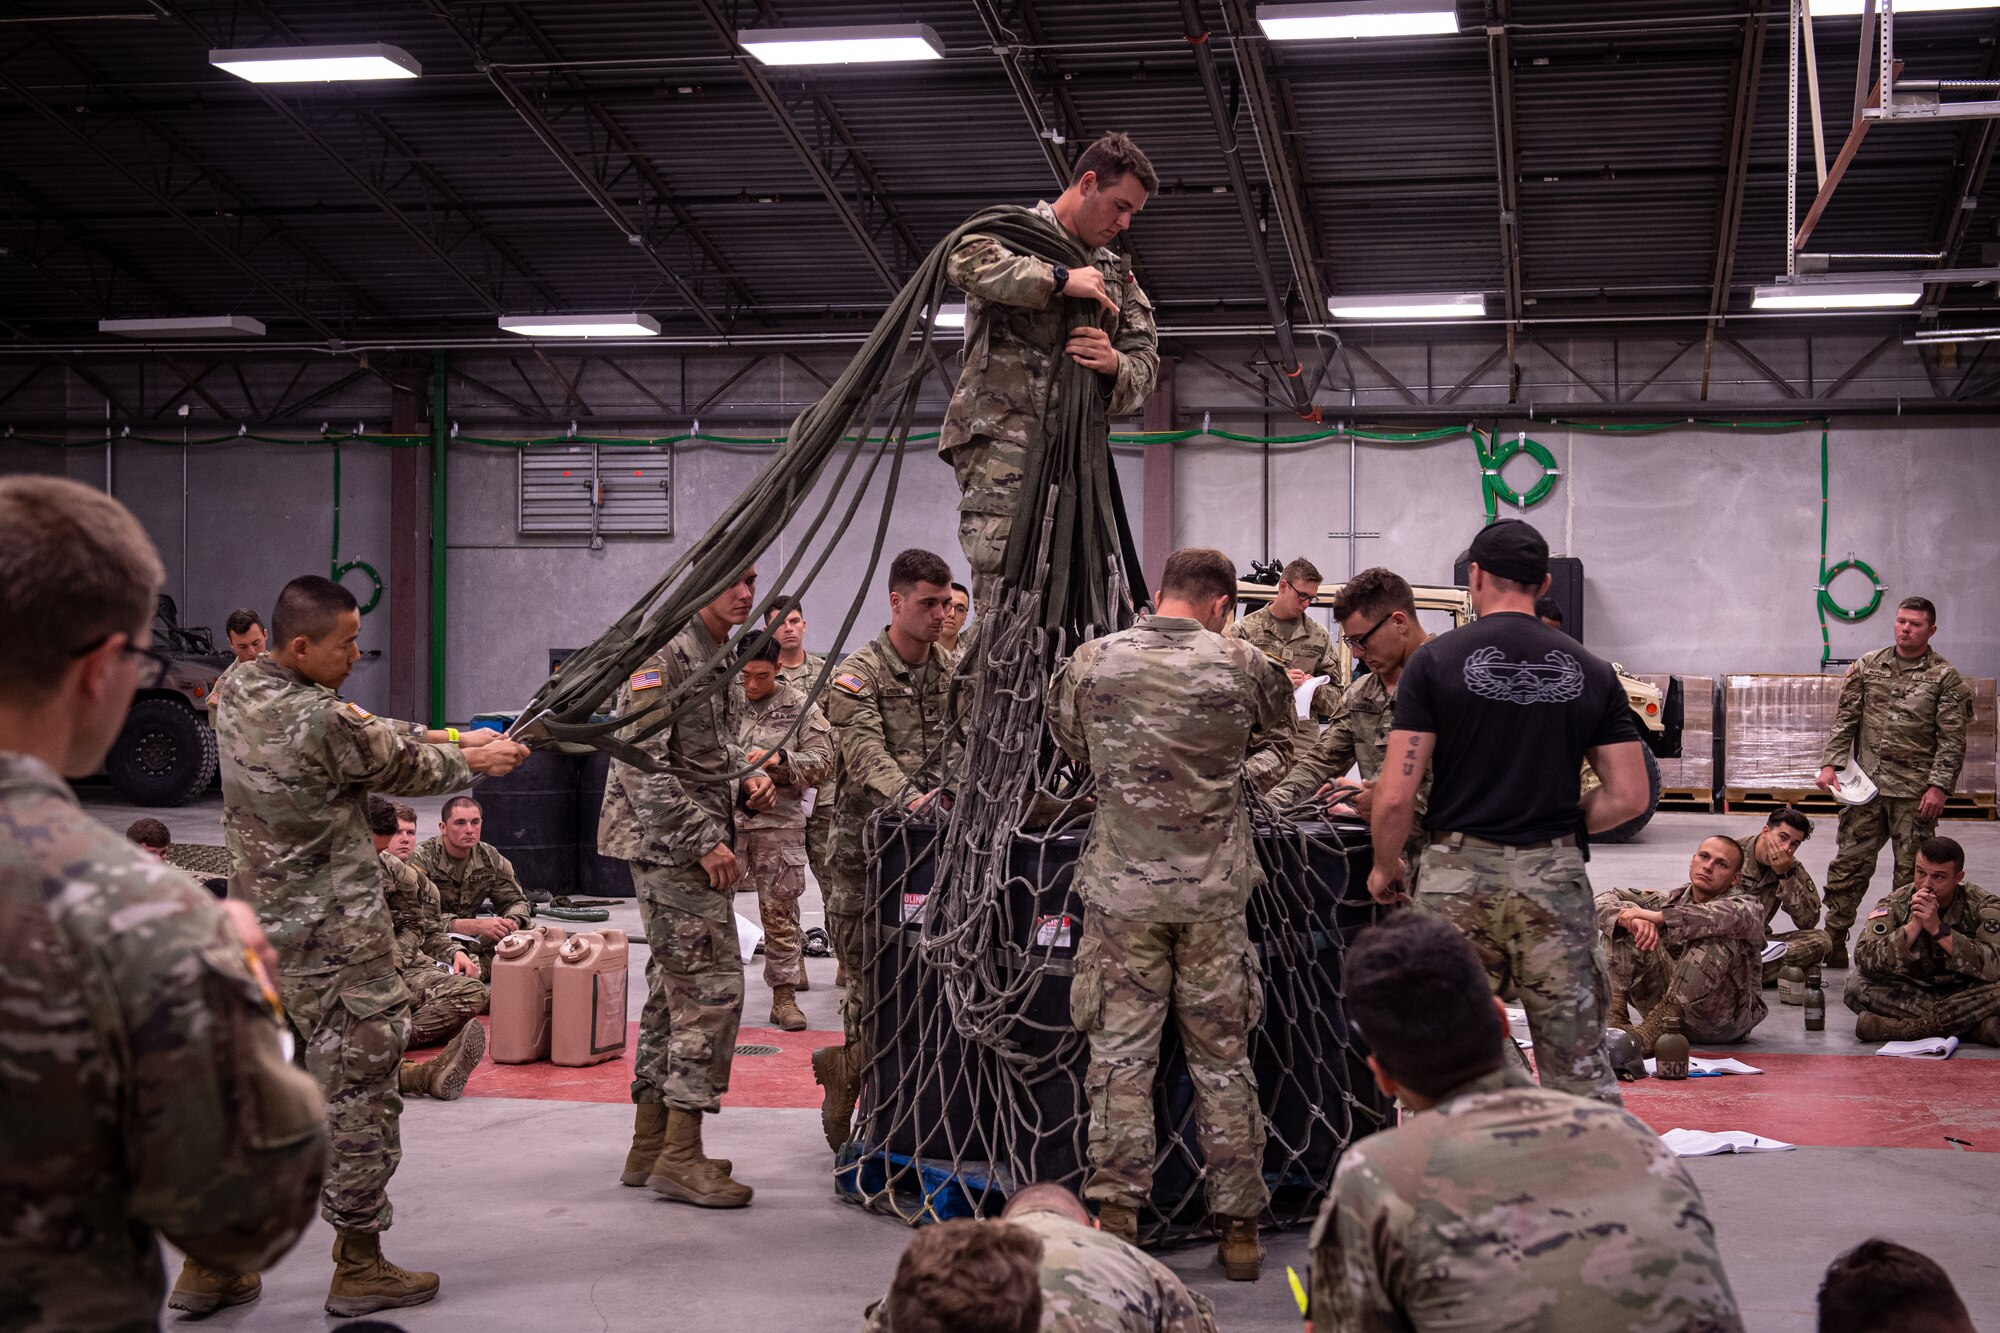 Air Assault students prepare equipment and supplies for sling load operations during training August 6, 2022, in Annville, Pennsylvania.